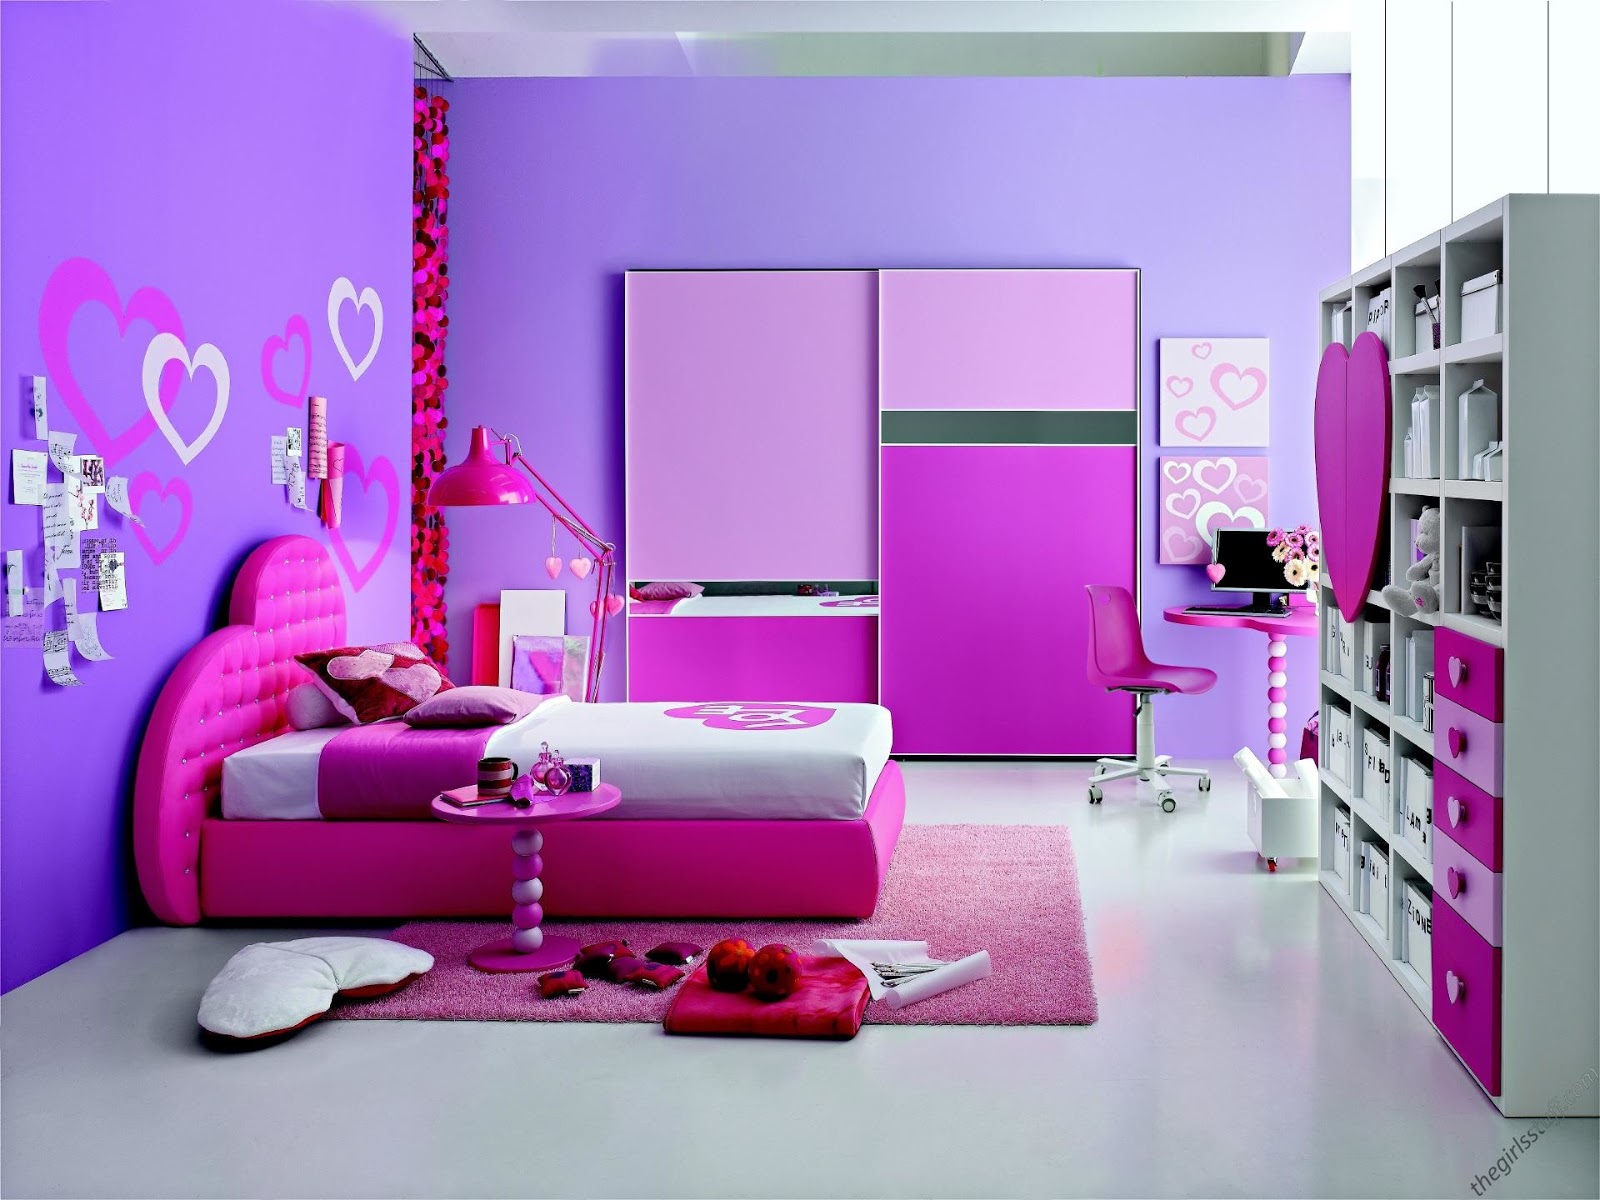 Cool HD Wallpaper for Girls Room - HD Wallpapers Images Pictures ...